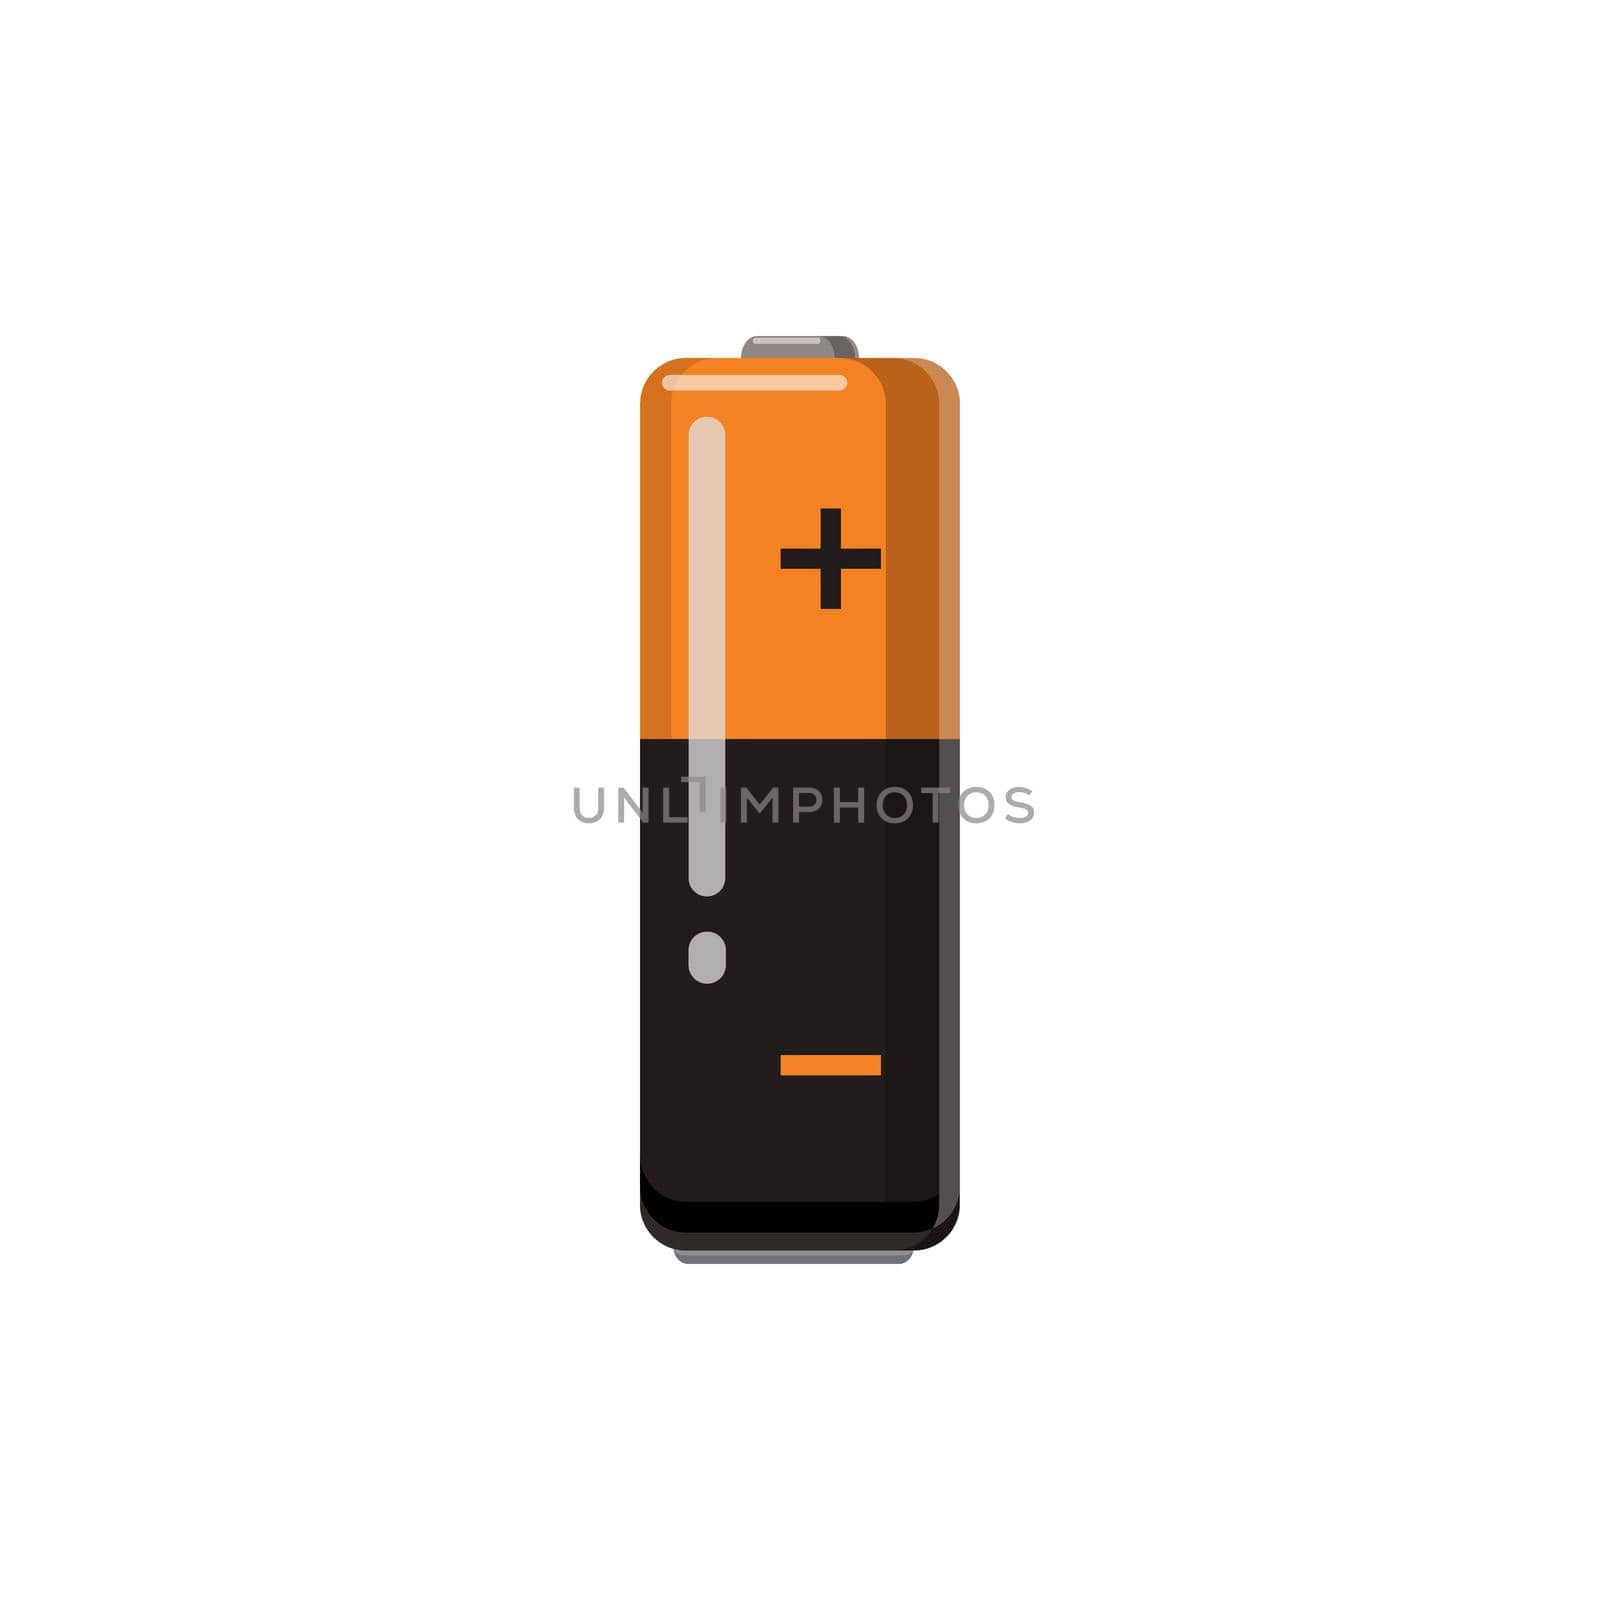 Battery icon, cartoon style by ylivdesign